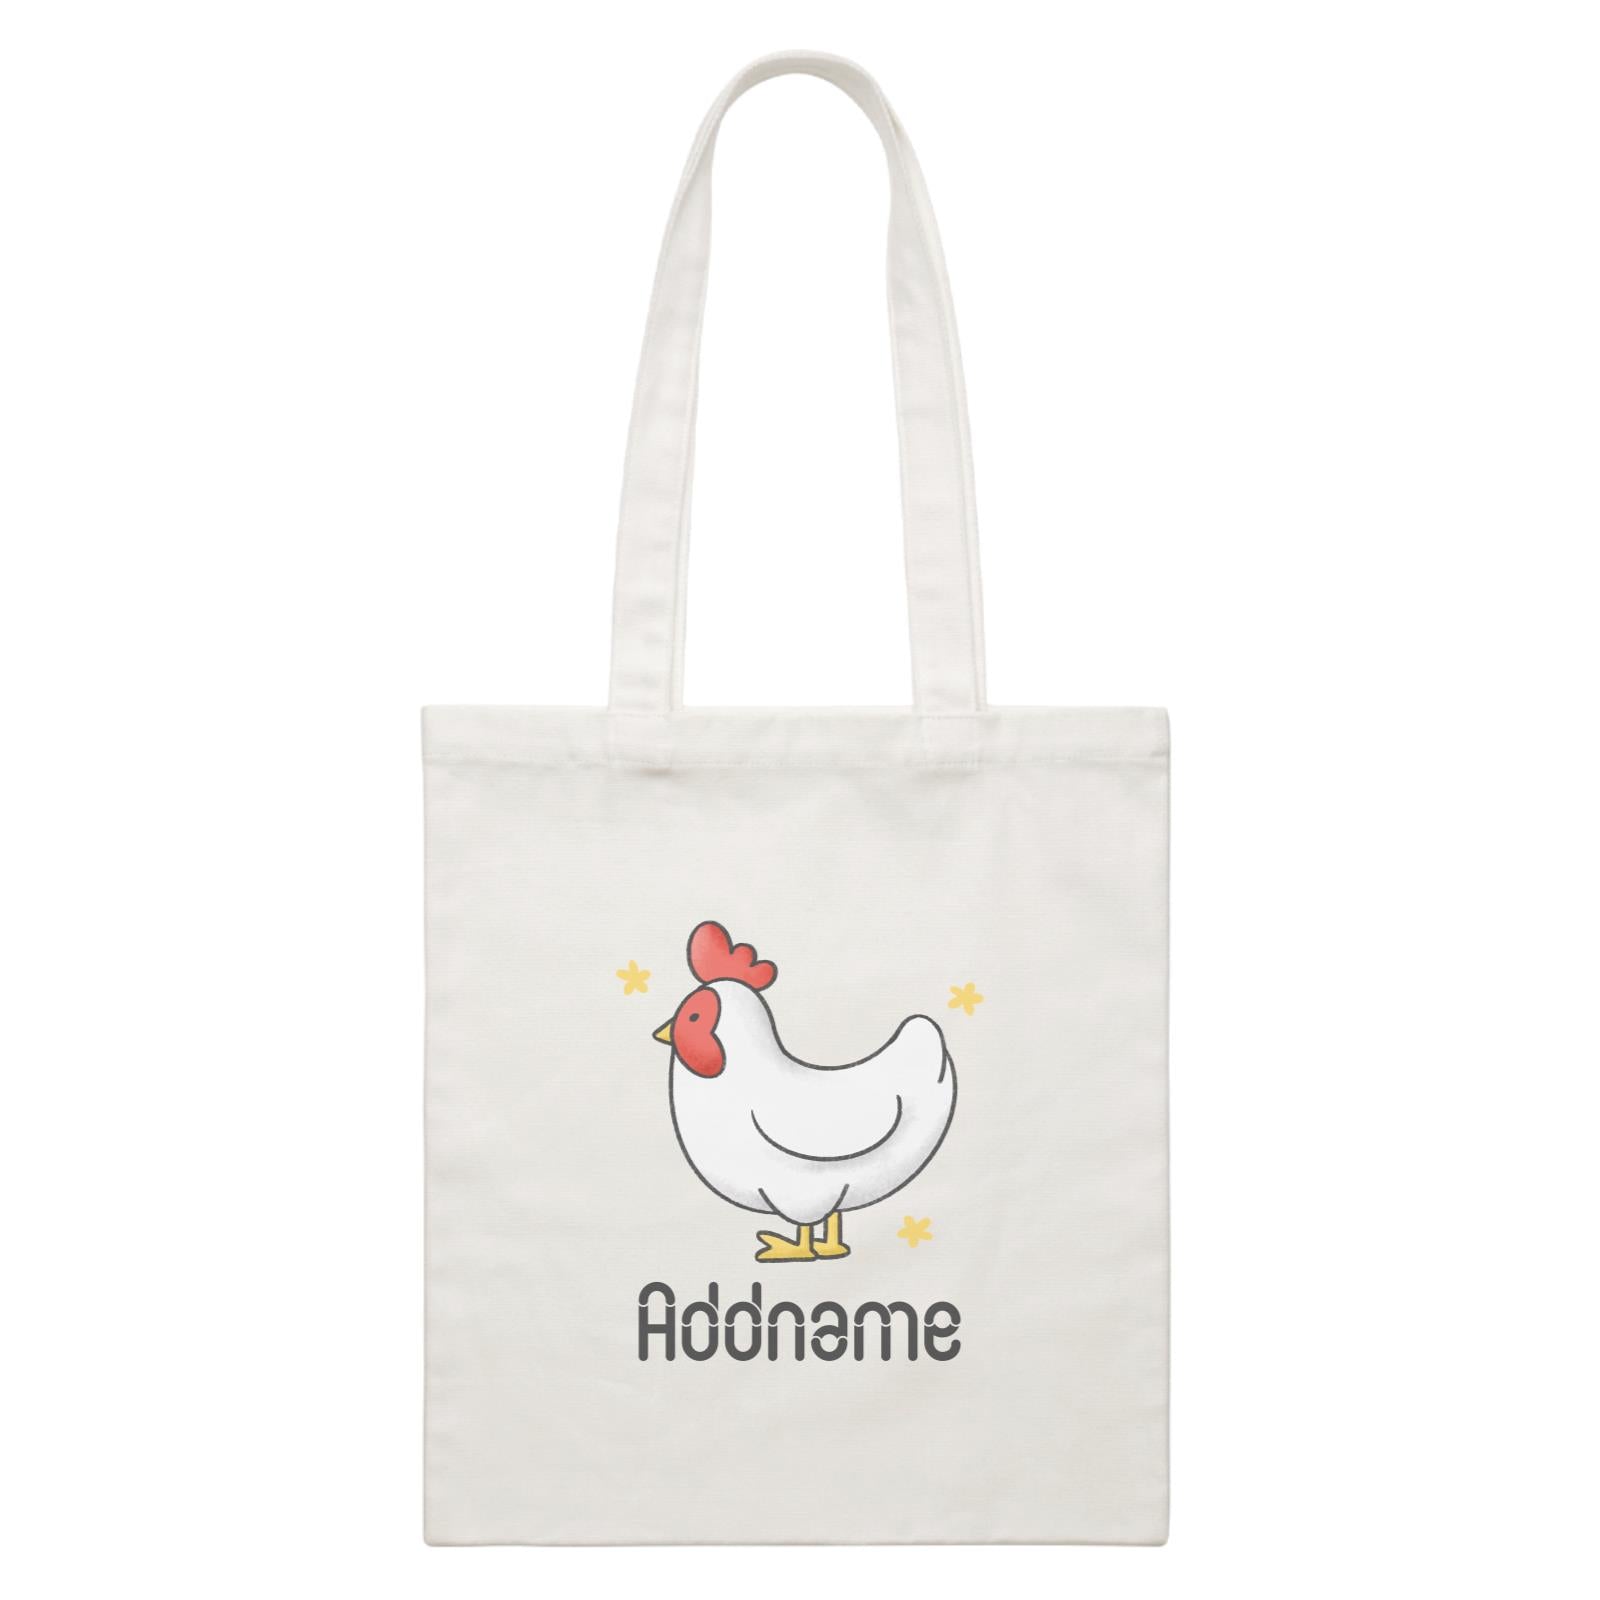 Cute Hand Drawn Style Rooster Addname White Canvas Bag